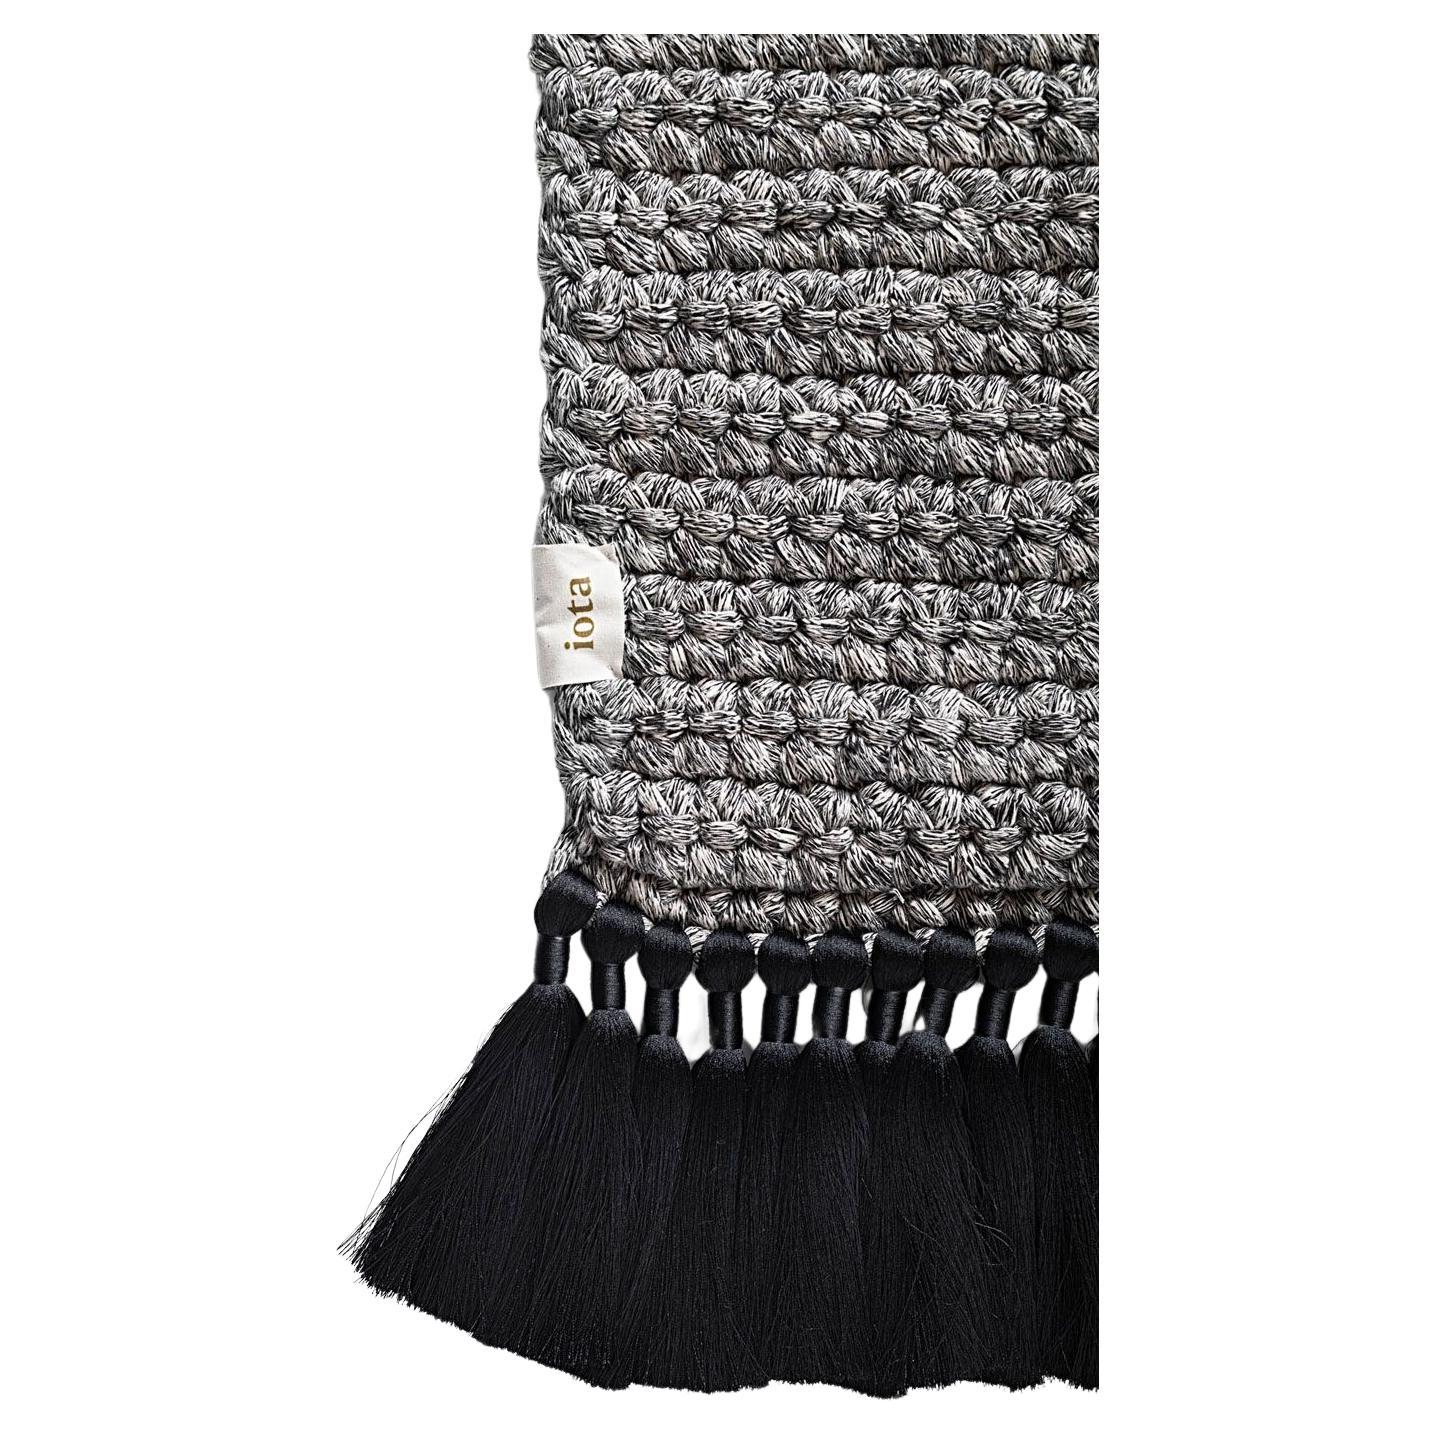 Handmade Crochet 200x300 cm Thick Rug in Grey Black Stone with tassels For Sale